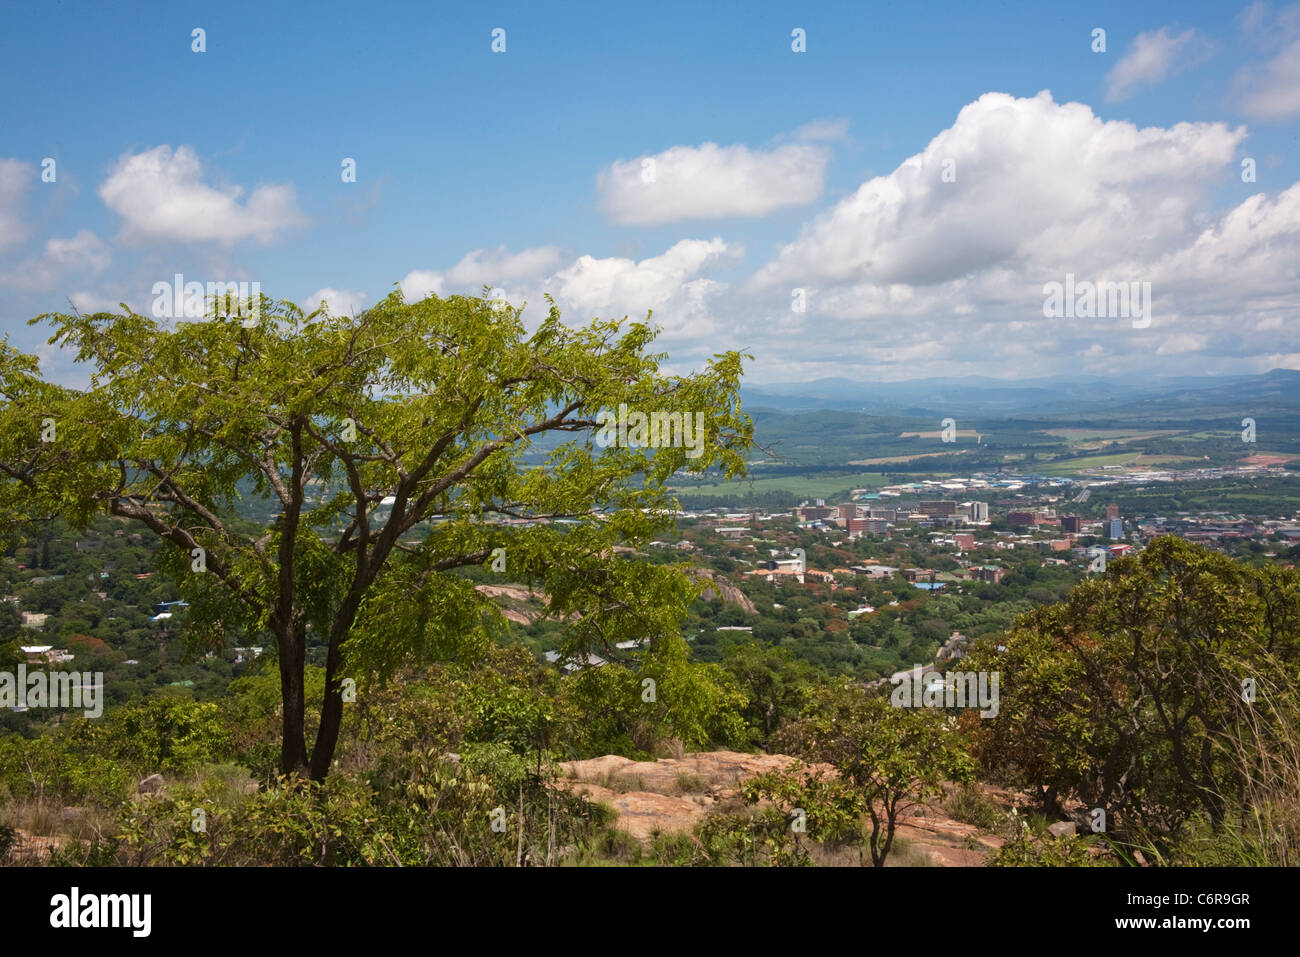 Scenic view of Nelspruit town with a kiaat tree in the foreground Stock Photo